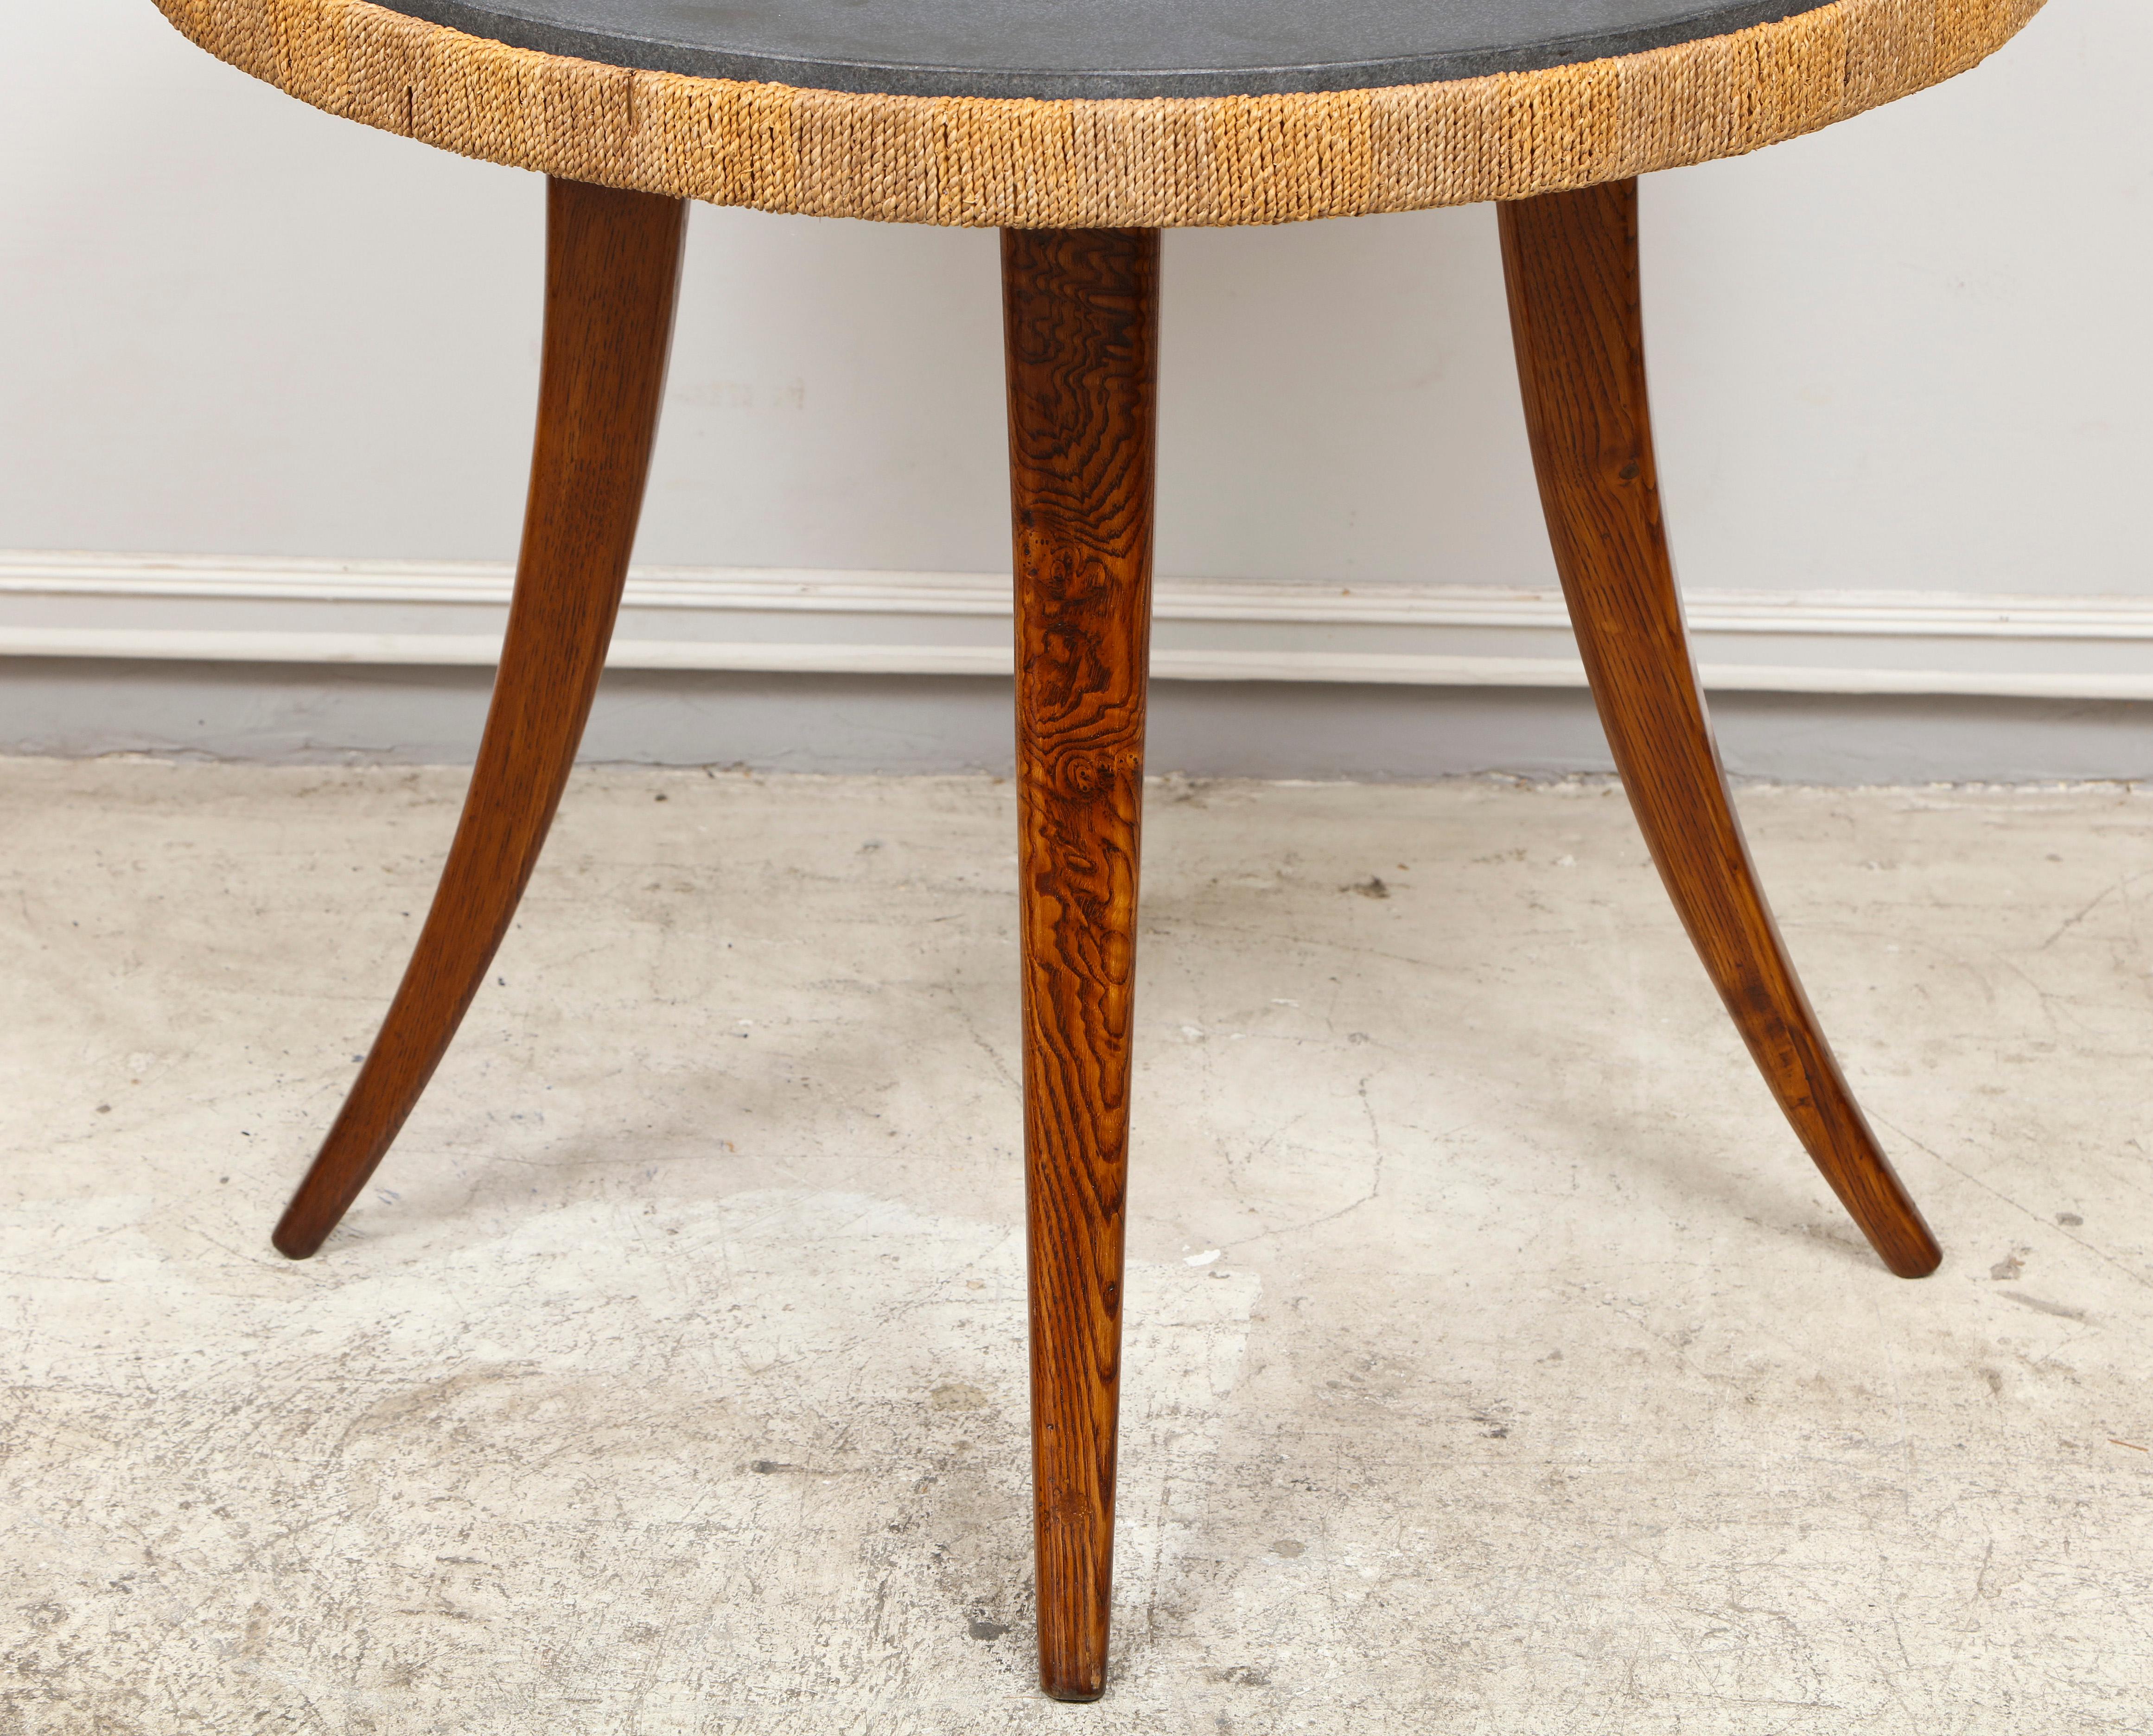 Woven Unusual French 1940s Marble-Top Table with Jute Apron on Splayed Legs